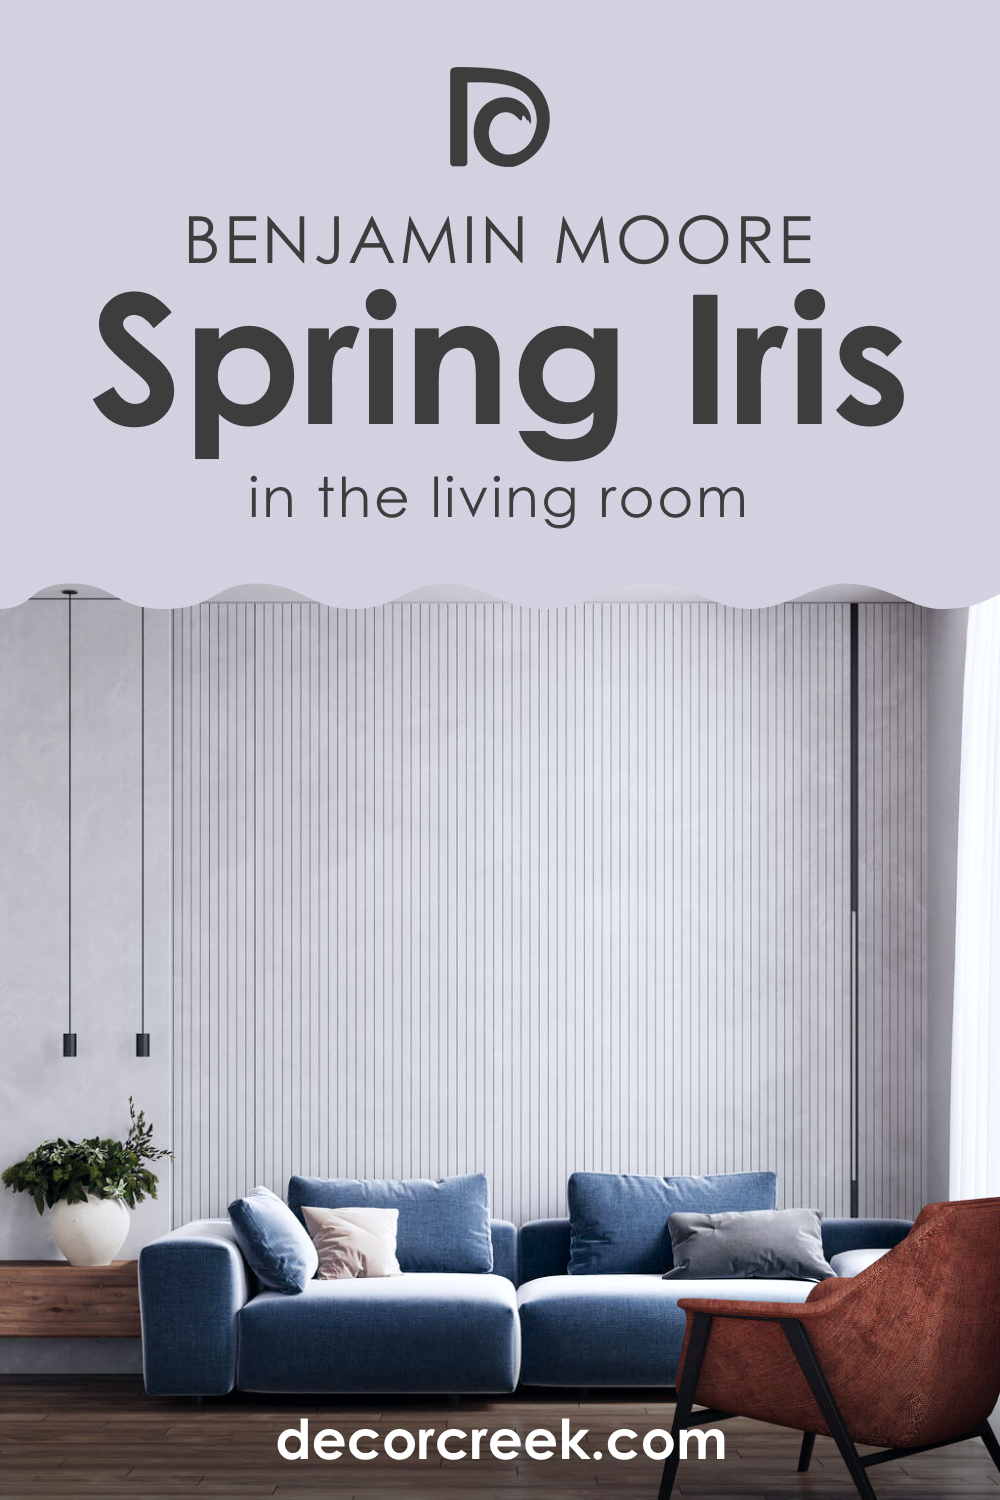 How to Use Spring Iris 1402 in the Living Room?